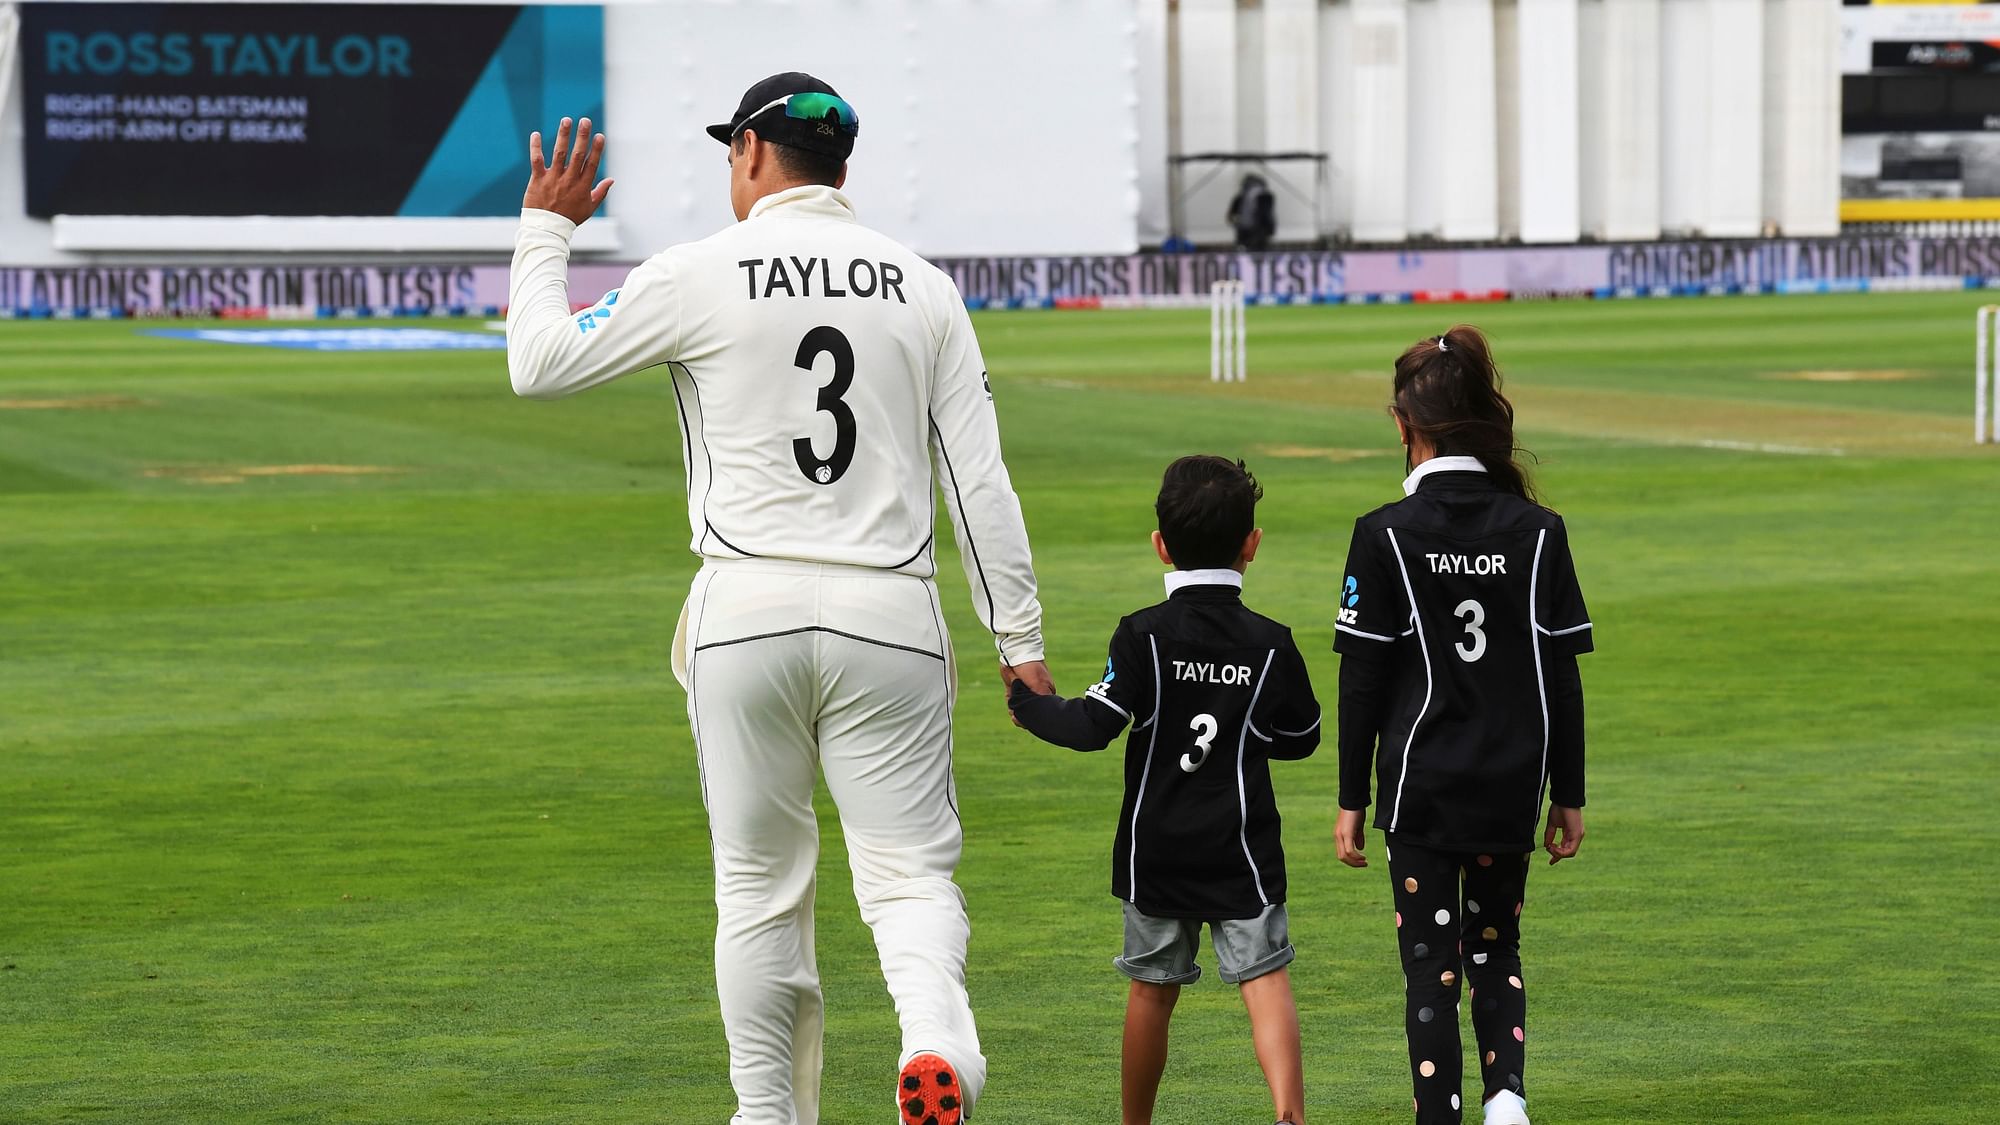 New Zealand’s Ross Taylor with two of his children Jonty (left) and McKenzie before his 100th test prior to the first cricket test between India and New Zealand.